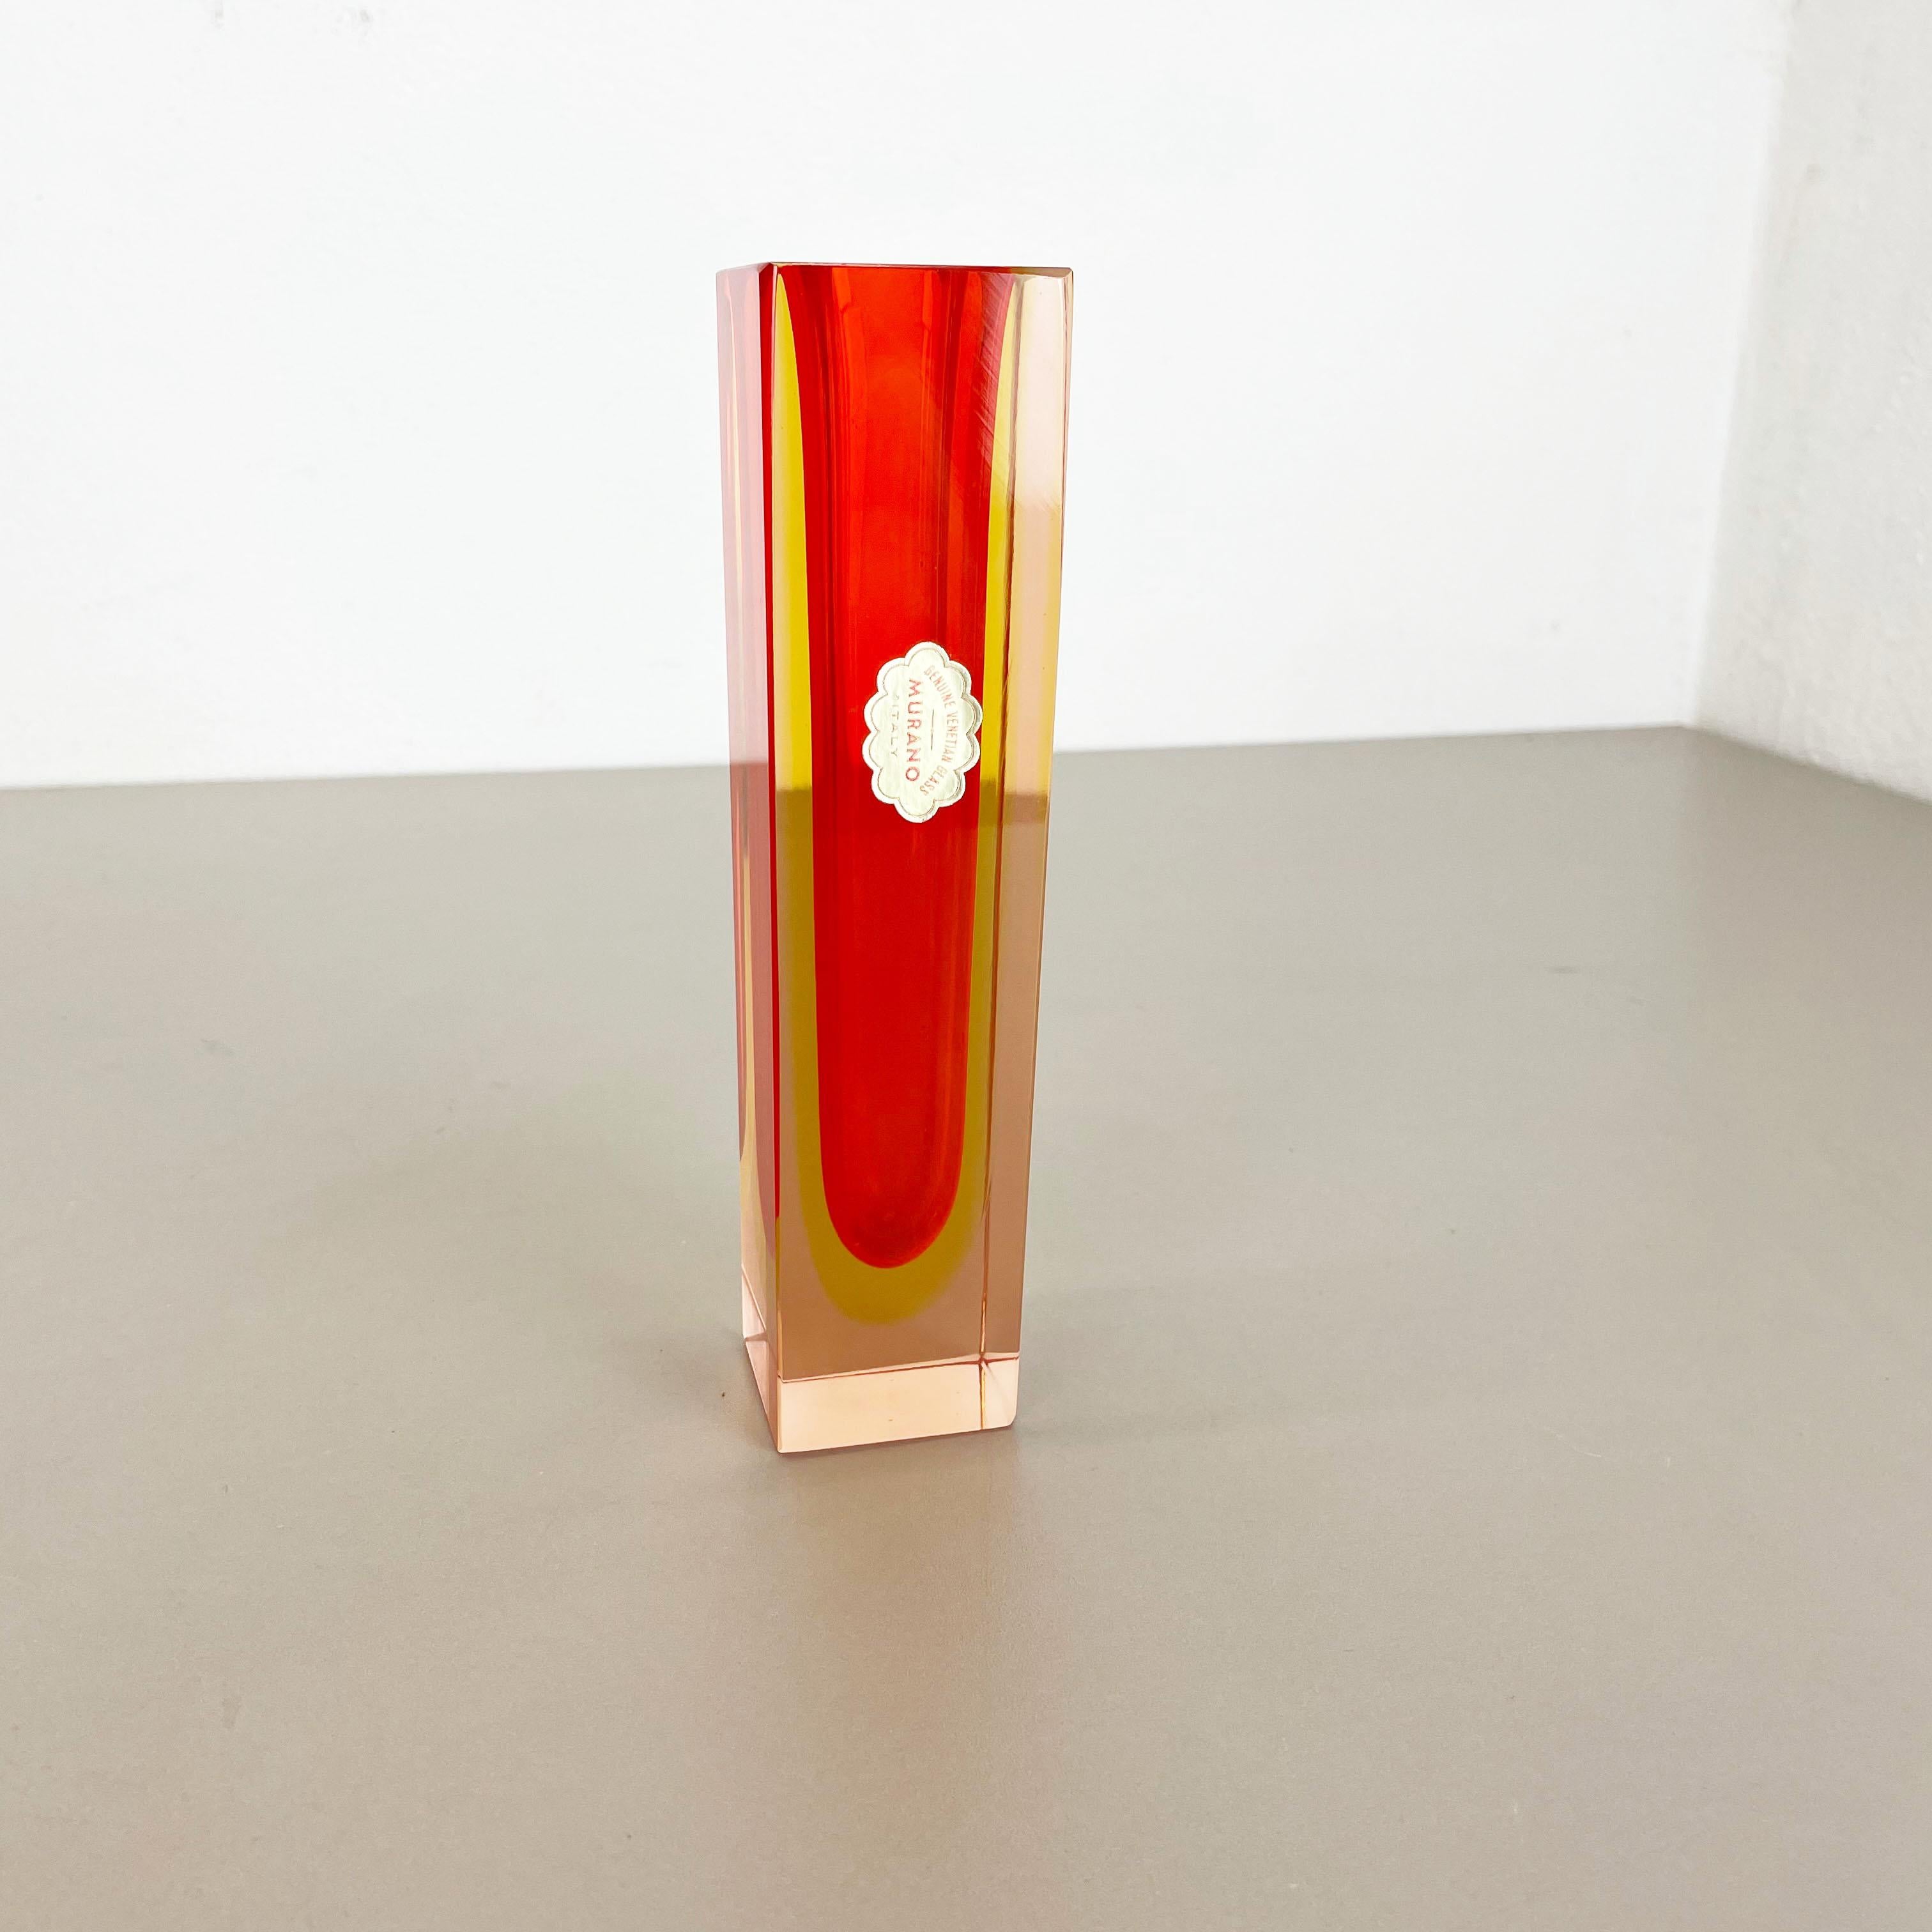 Mid-Century Modern Large Orange Murano Glass Sommerso Vase by Flavio Poli Attributed, Italy 1970s